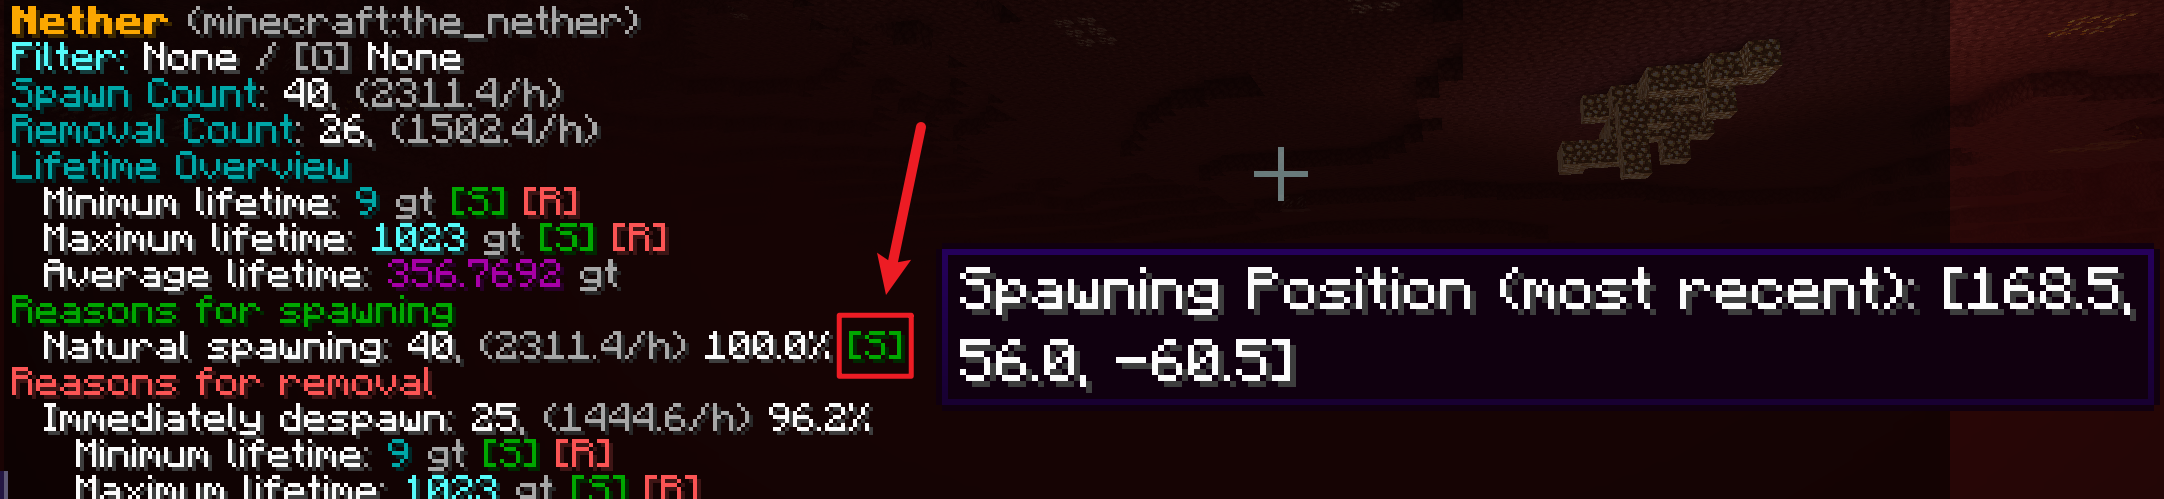 most recent spawning position